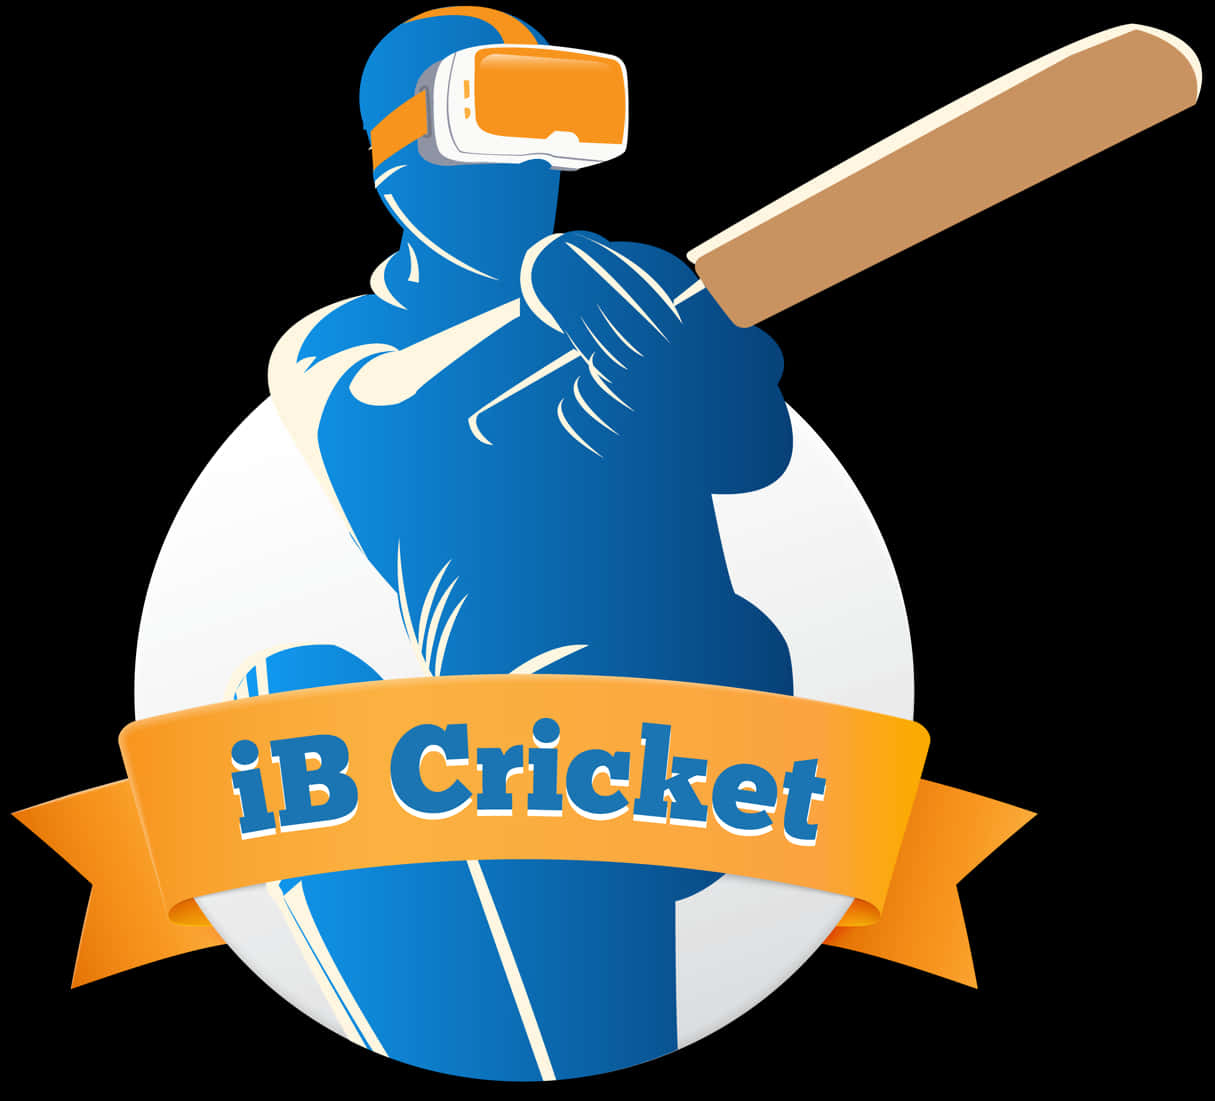 A Logo Of A Man Playing Cricket